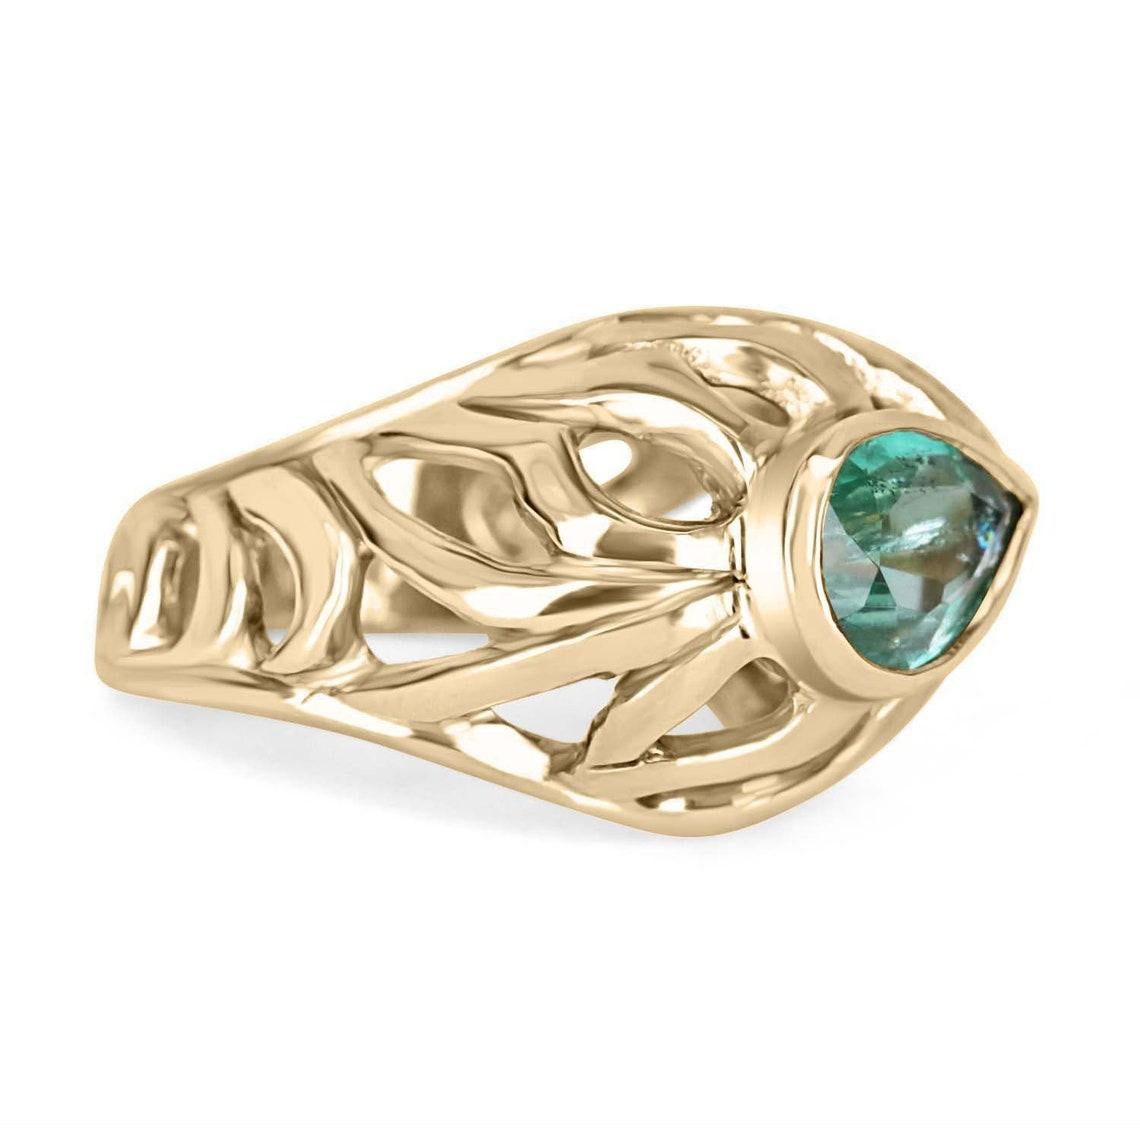 Featured is a 2.20-carat solid gold pear cut emerald, handmade solitaire ring. The smoothly carved cutouts outline the shape of tiger stripes and create an intricate design. In the center, a gorgeous 2.20ct natural emerald sits in a golden bezel.